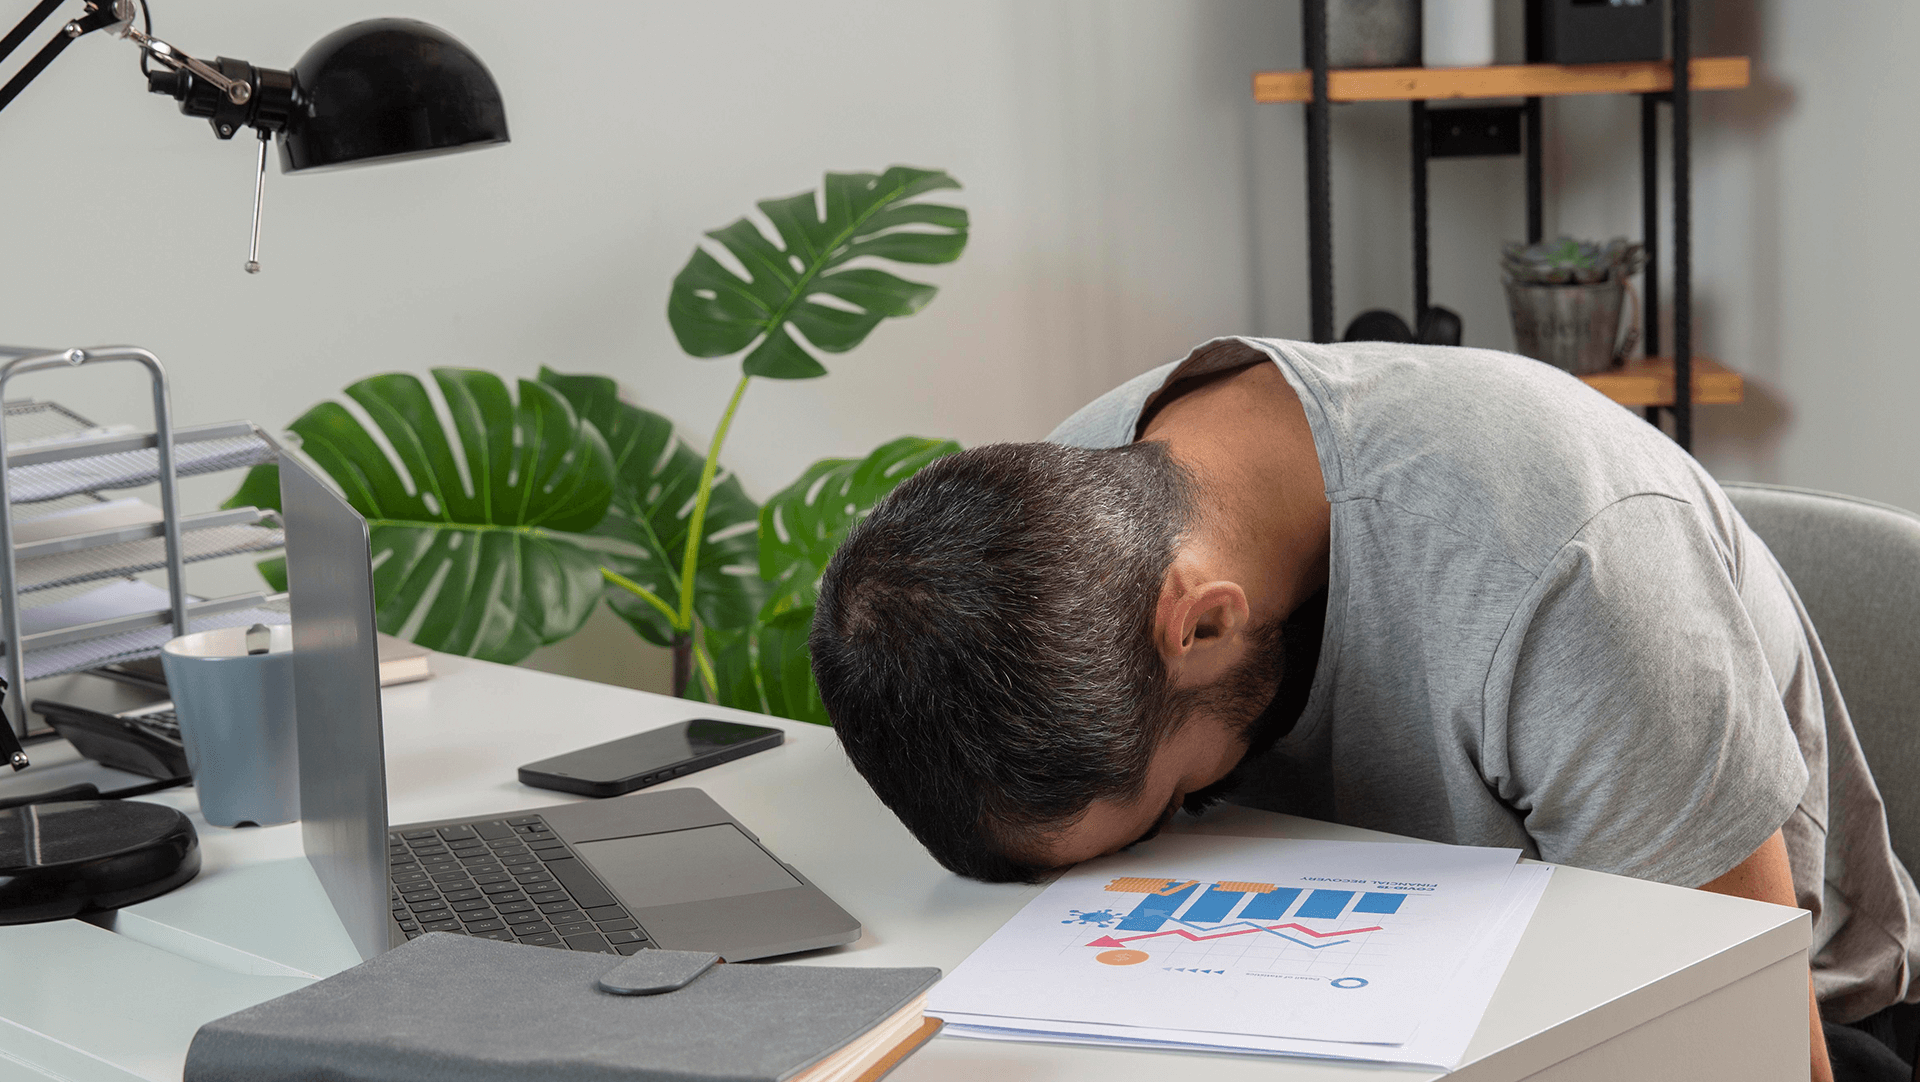 Exhausted office worker asleep on desk with laptop and documents.